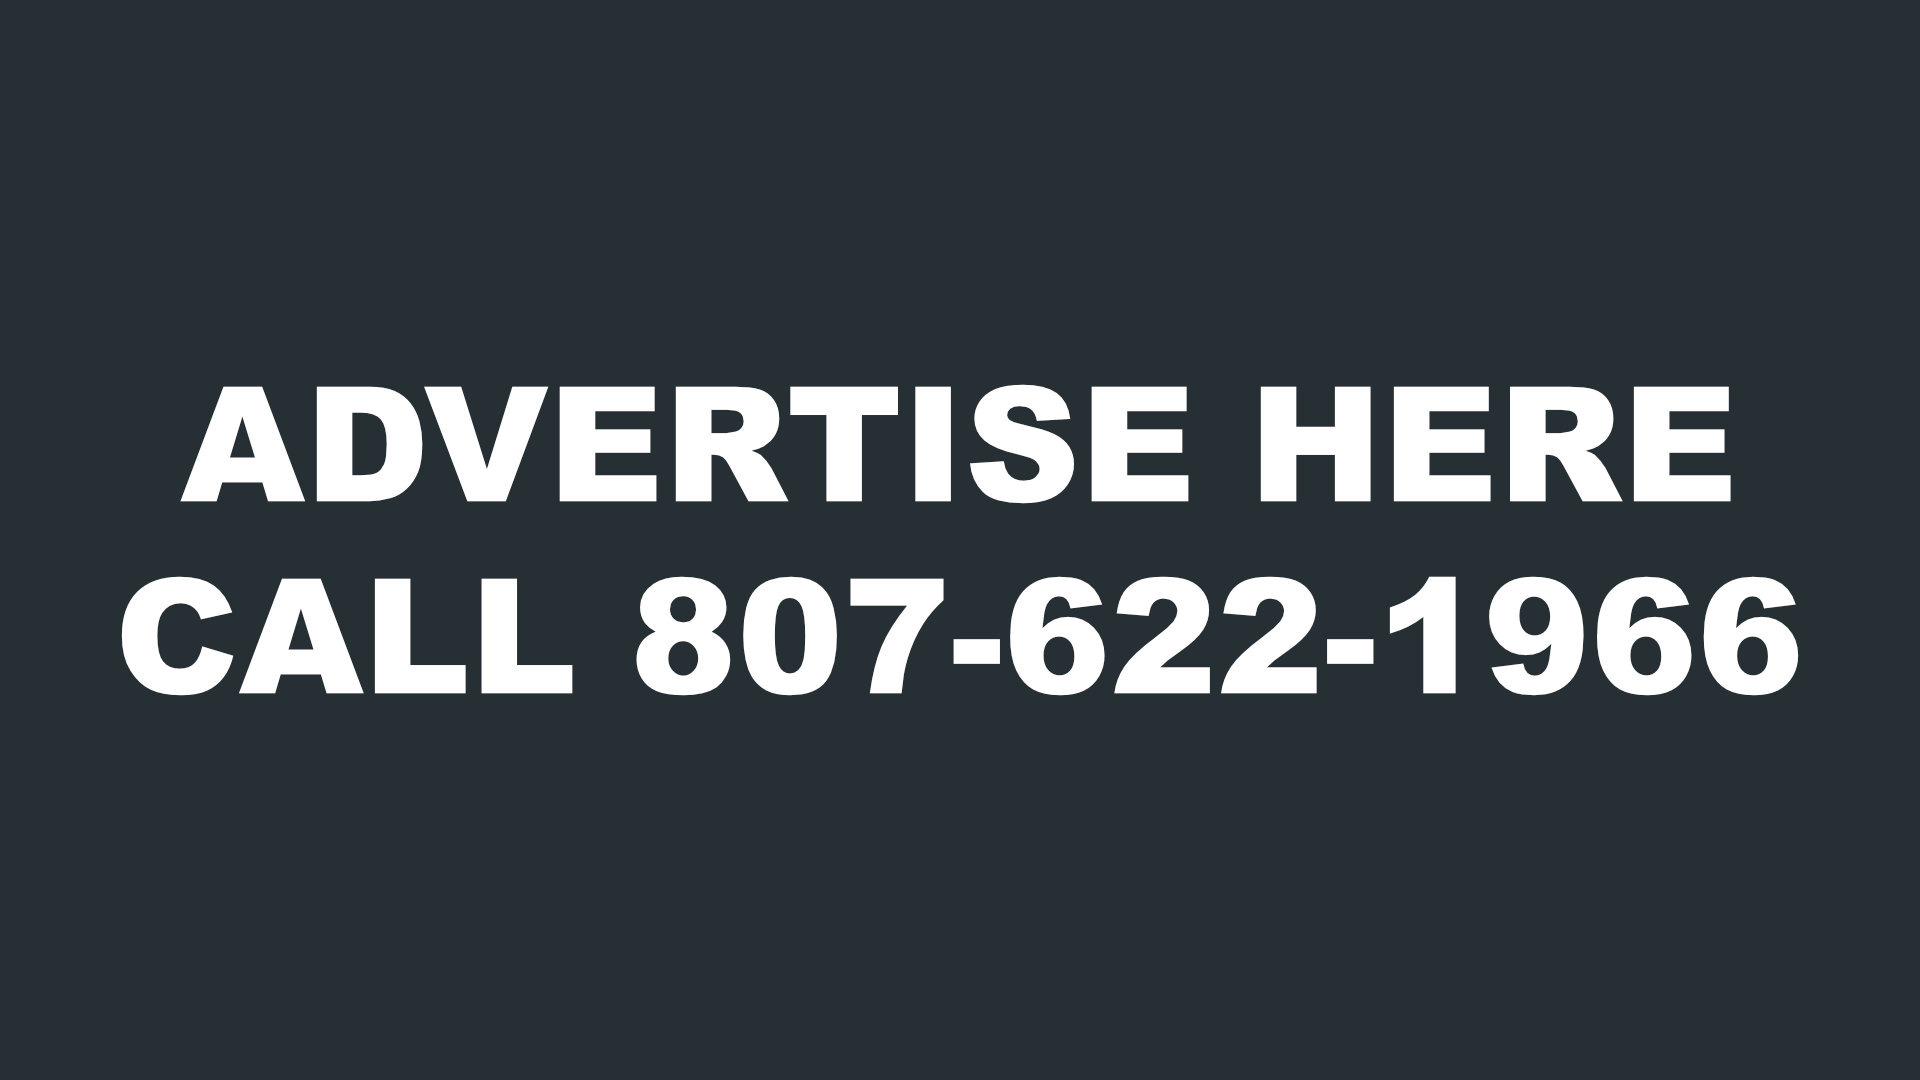 Advertise Here 807-622-1966